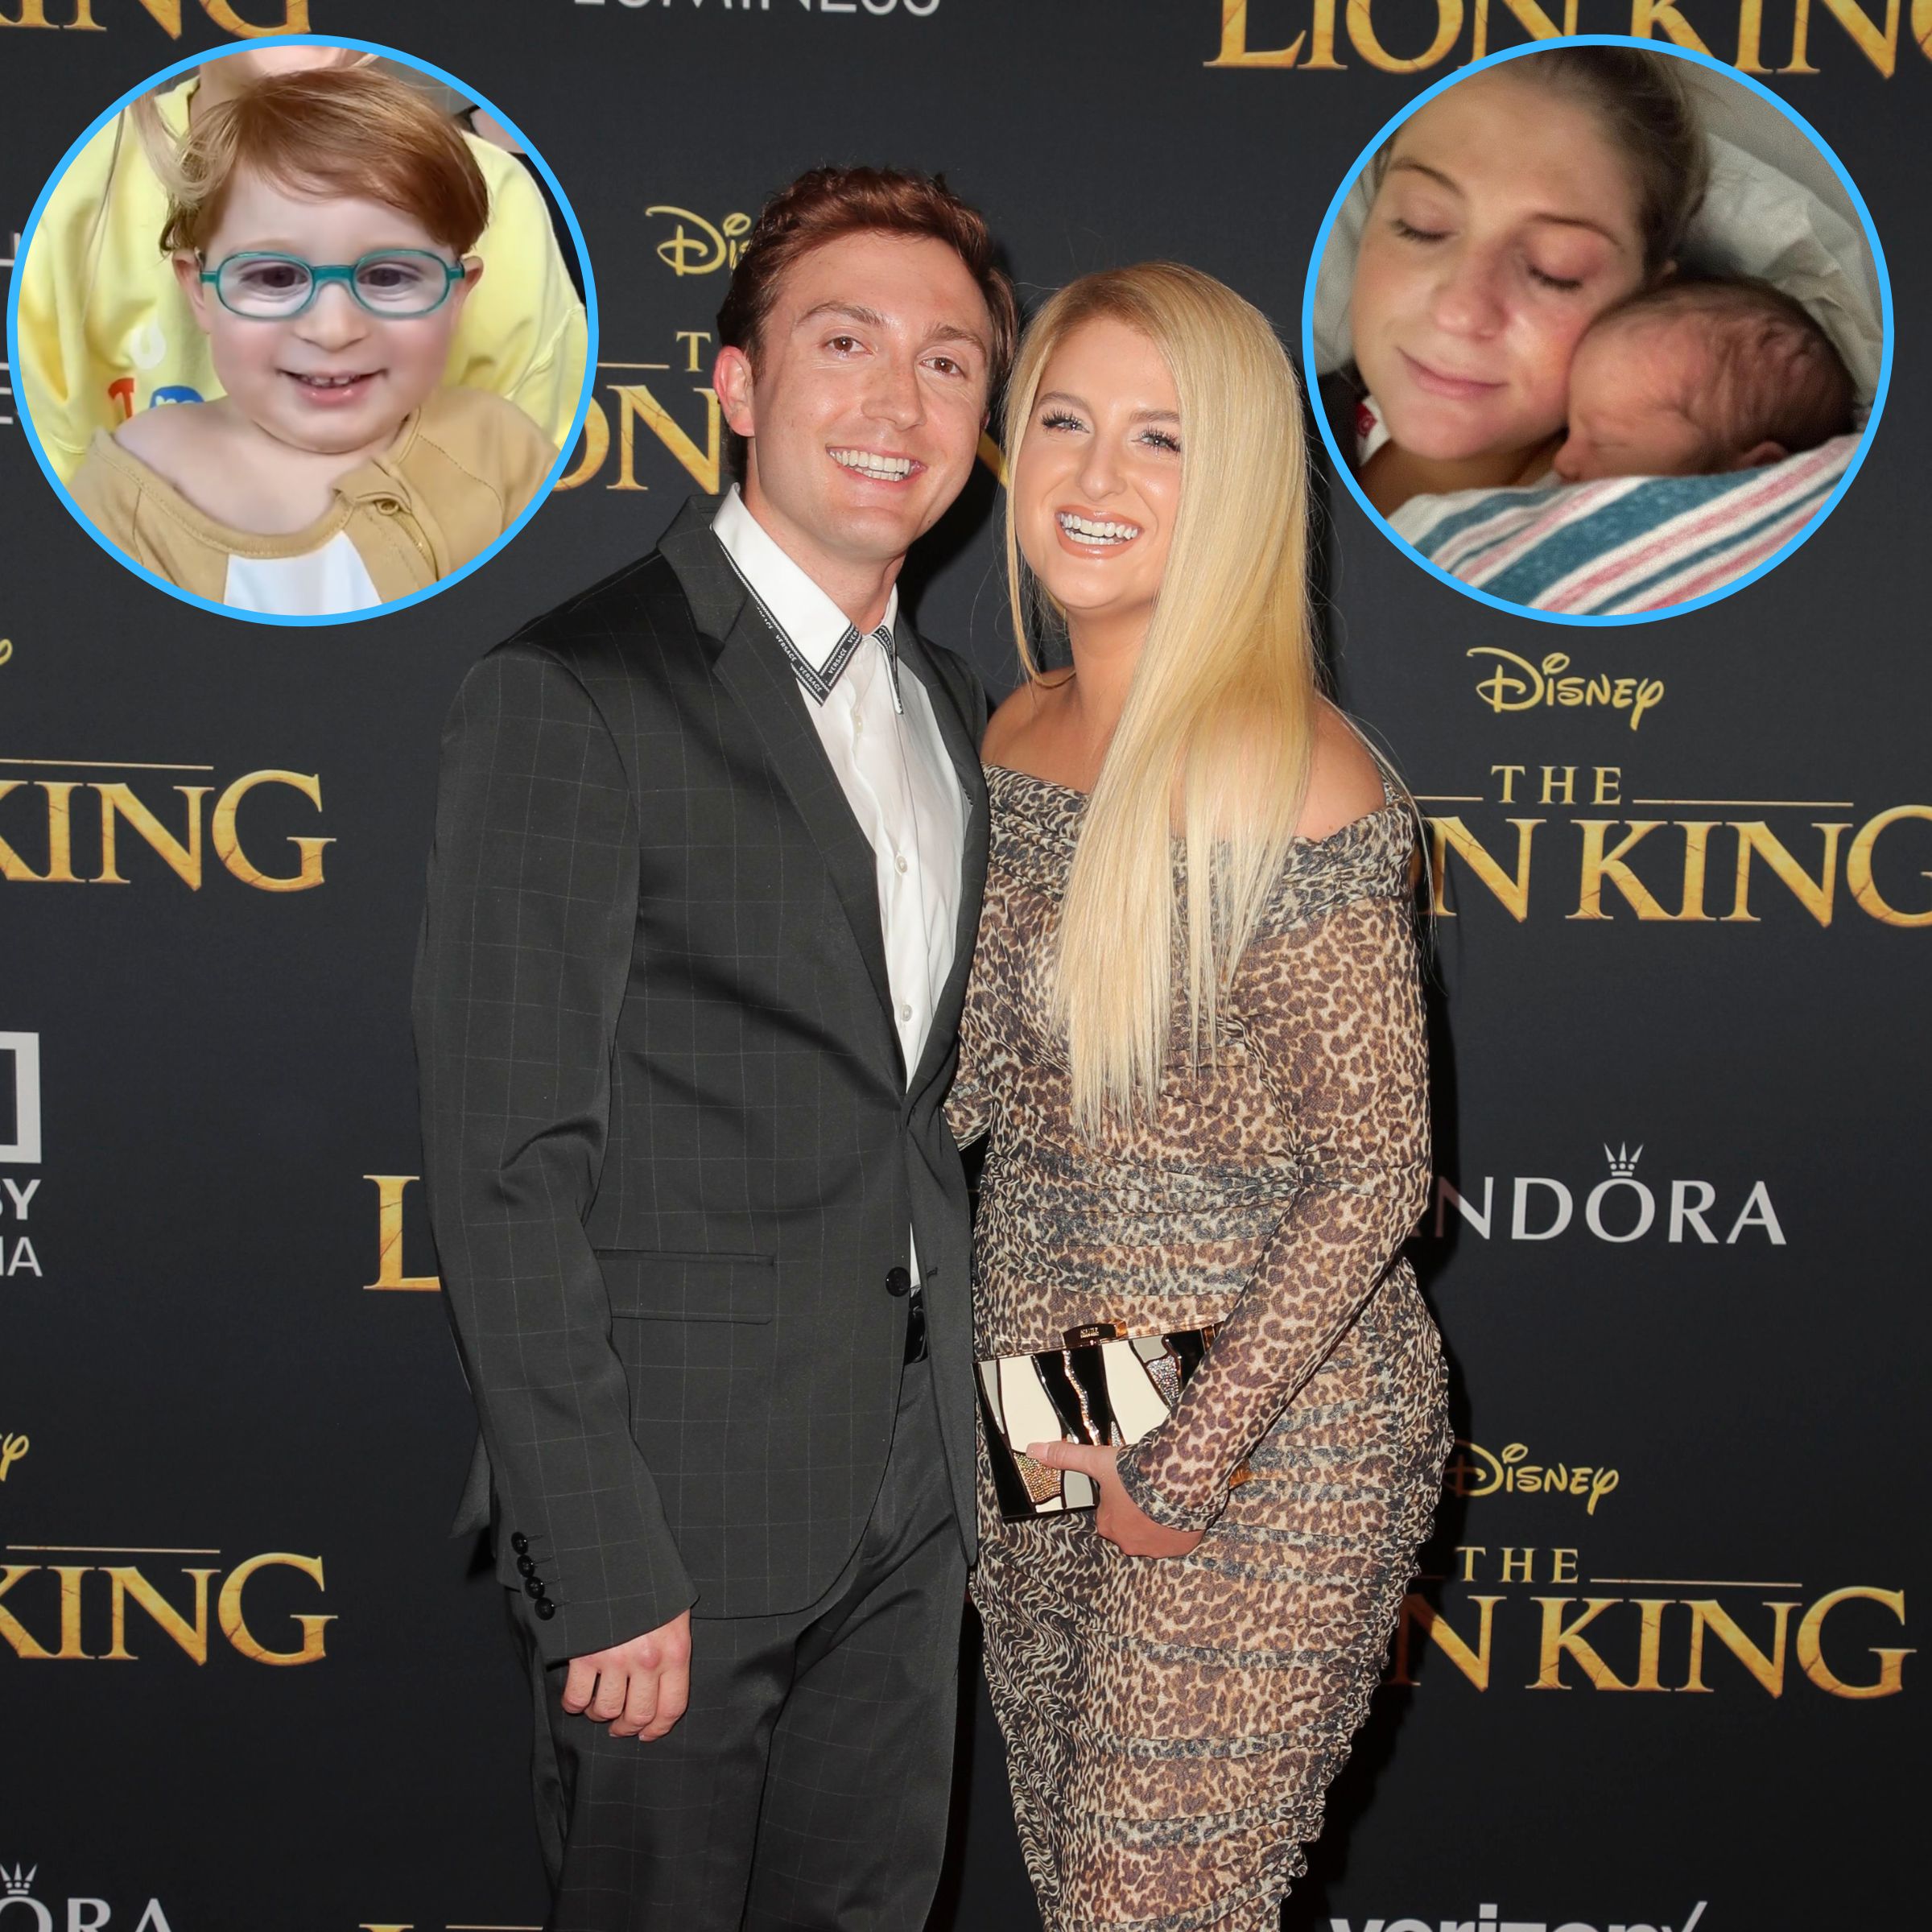 Meghan Trainor gives birth to second baby with Daryl Sabara